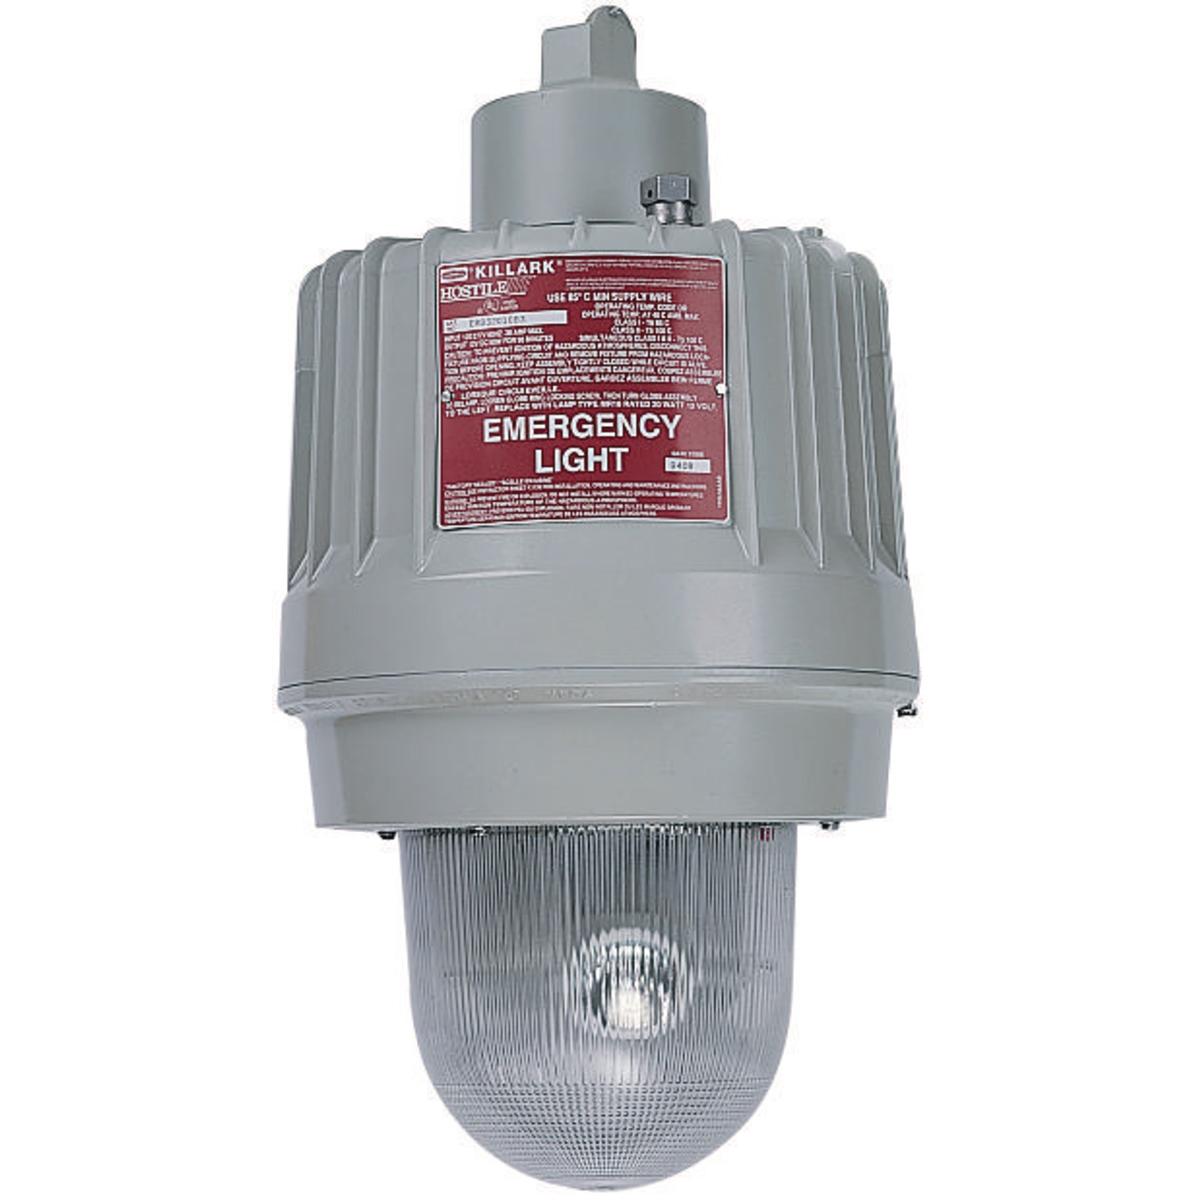 Hubbell EBB32010A3 Emergency Hazardous Location Three Lamp 1" Pendant  ; Patented design three high intensity lamps can be independently adjusted to provide custom emergency lighting to a specific area ; Three 20 watt MR16 lamps included ; Pendant, bracket and ceiling mount